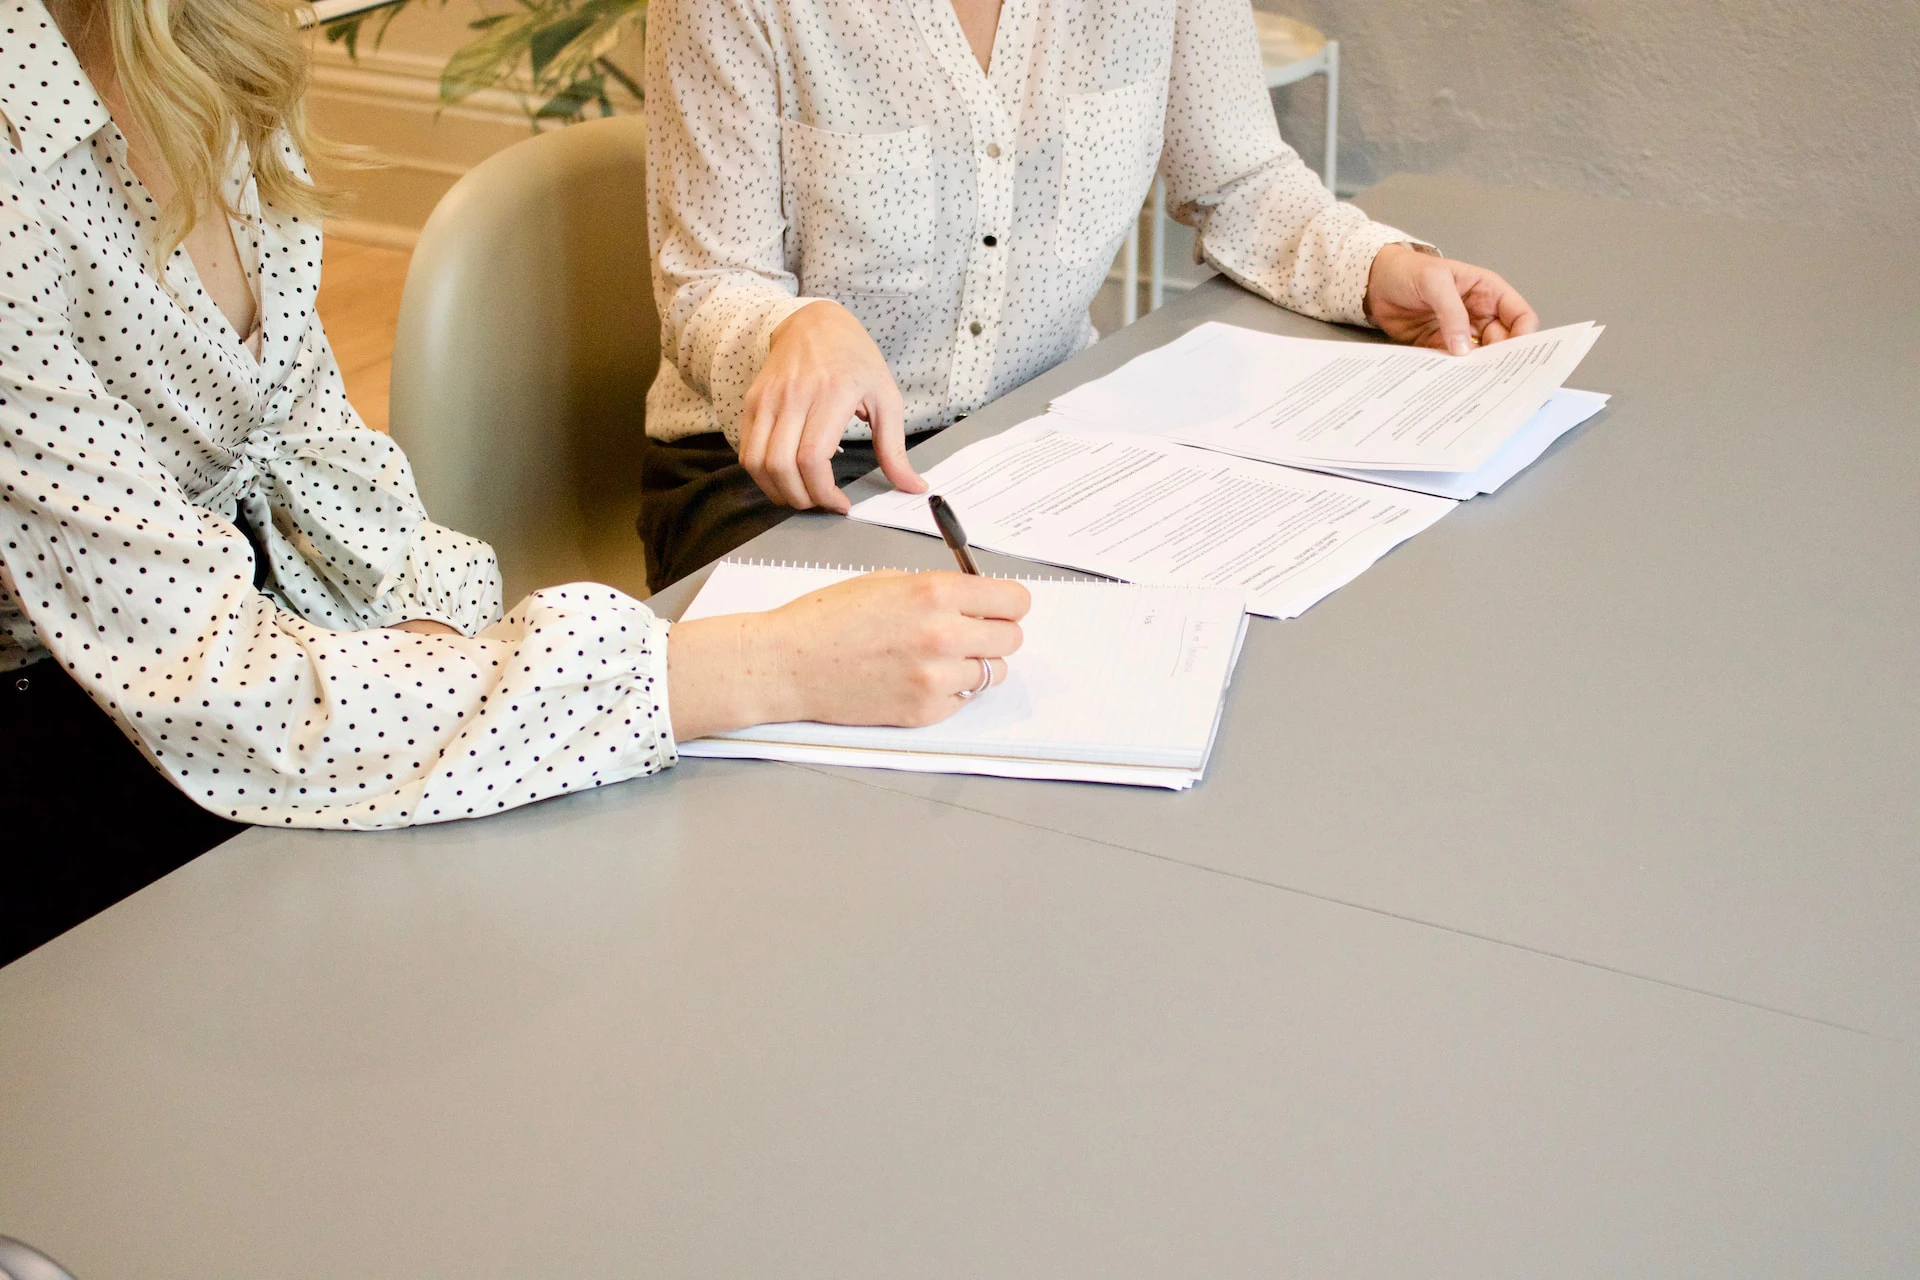 papers on grey desk being reviewed by two woman in white shirts